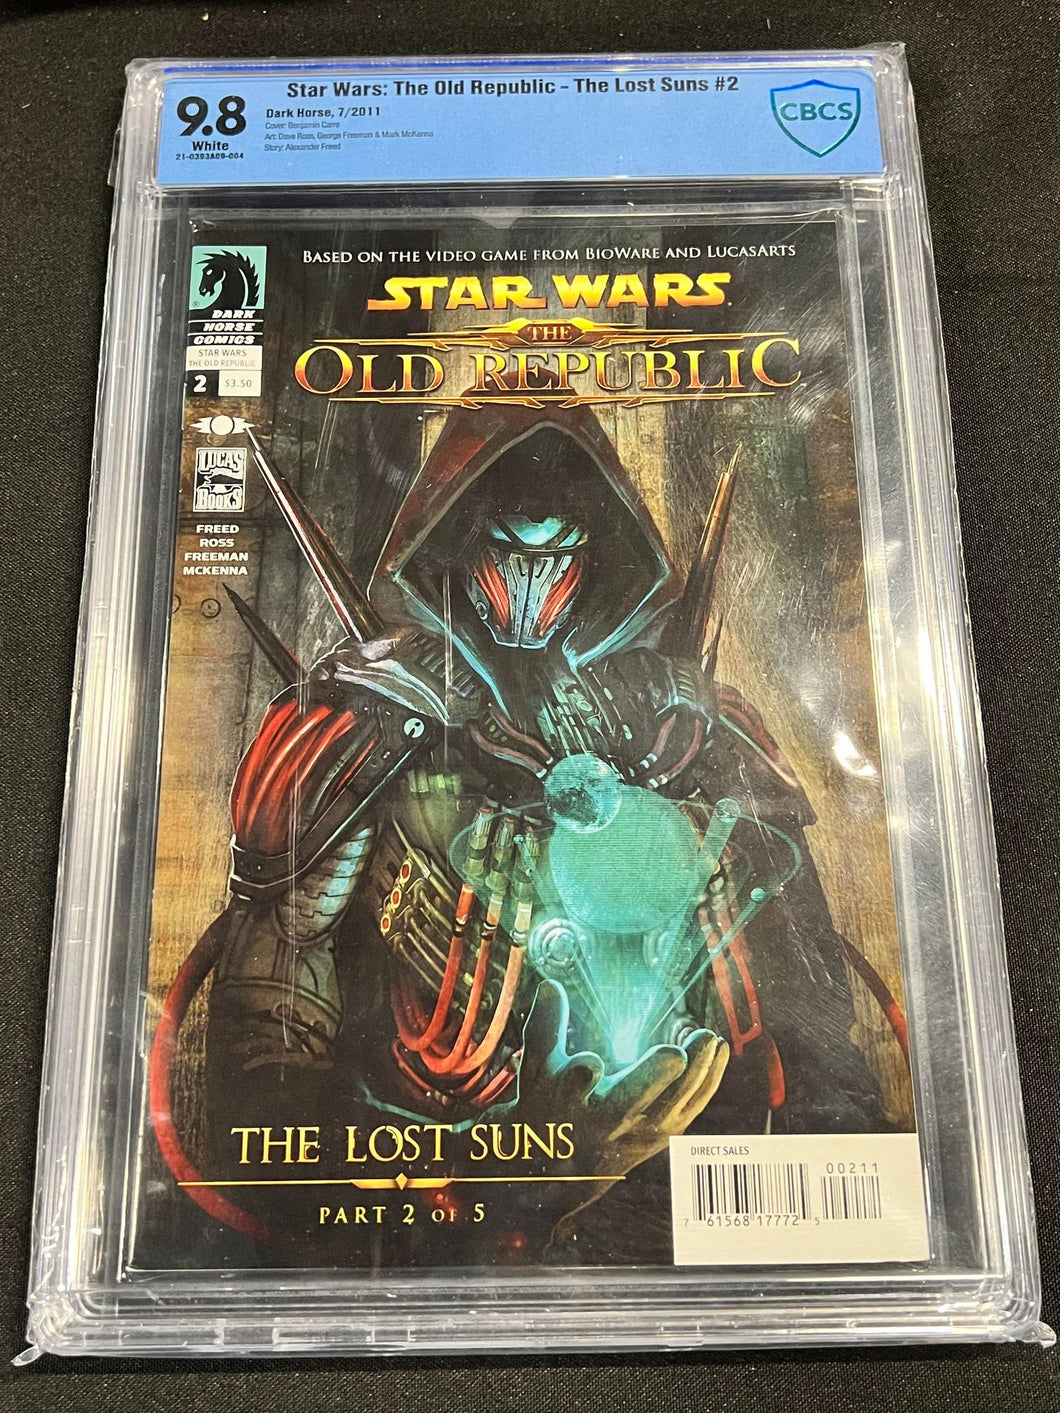 Star Wars: The Old Republic - The Lost Suns #2 CBCS 9.8